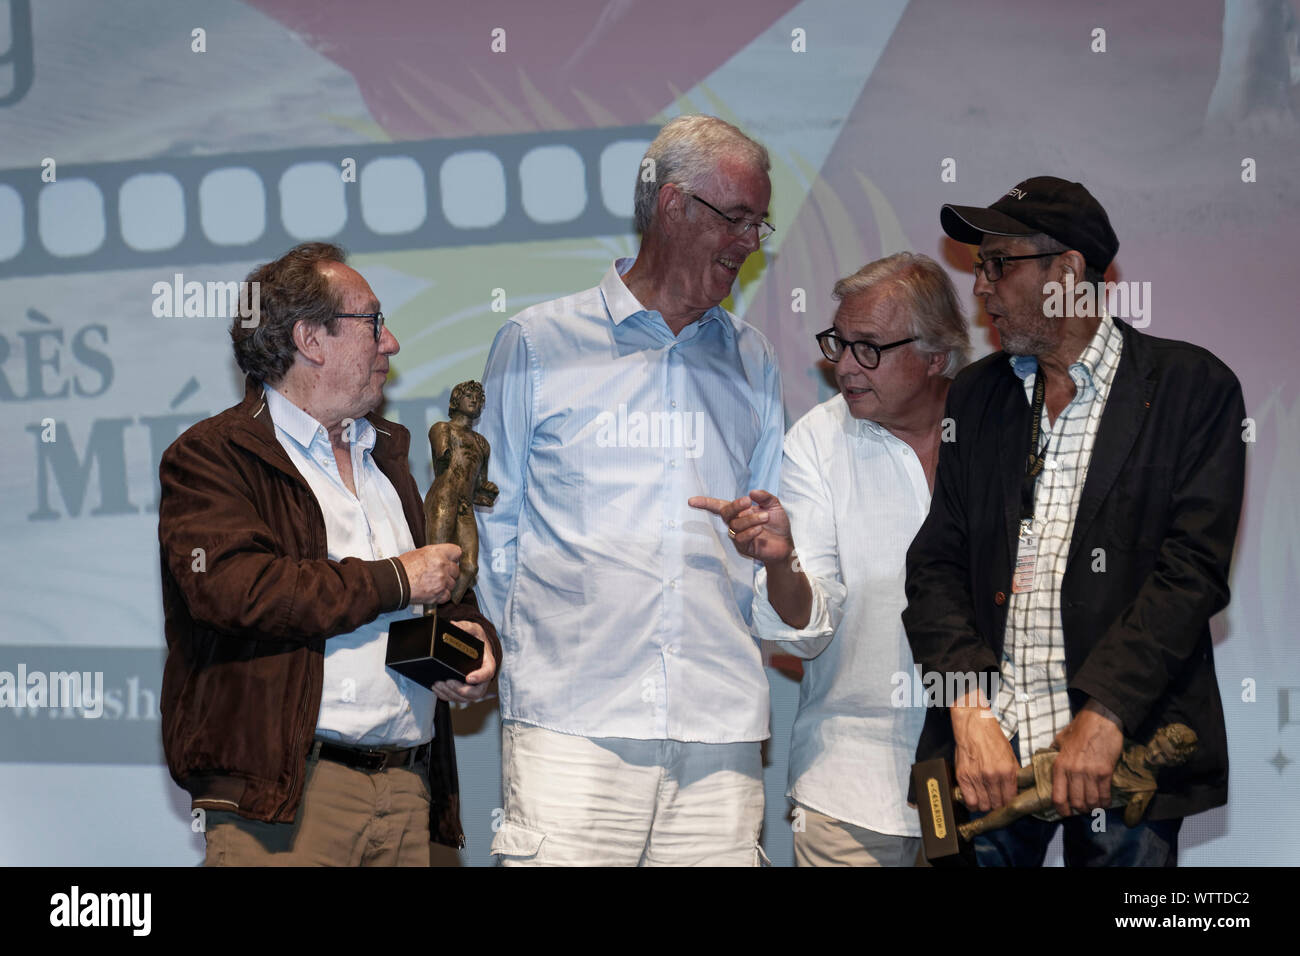 Cap of Agde, France.23 rd June, 2019. Philippe du Janerand (L), Husky Hilal & members of Jury at the Top of the Short Films -The Herault of Cine & TV Stock Photo